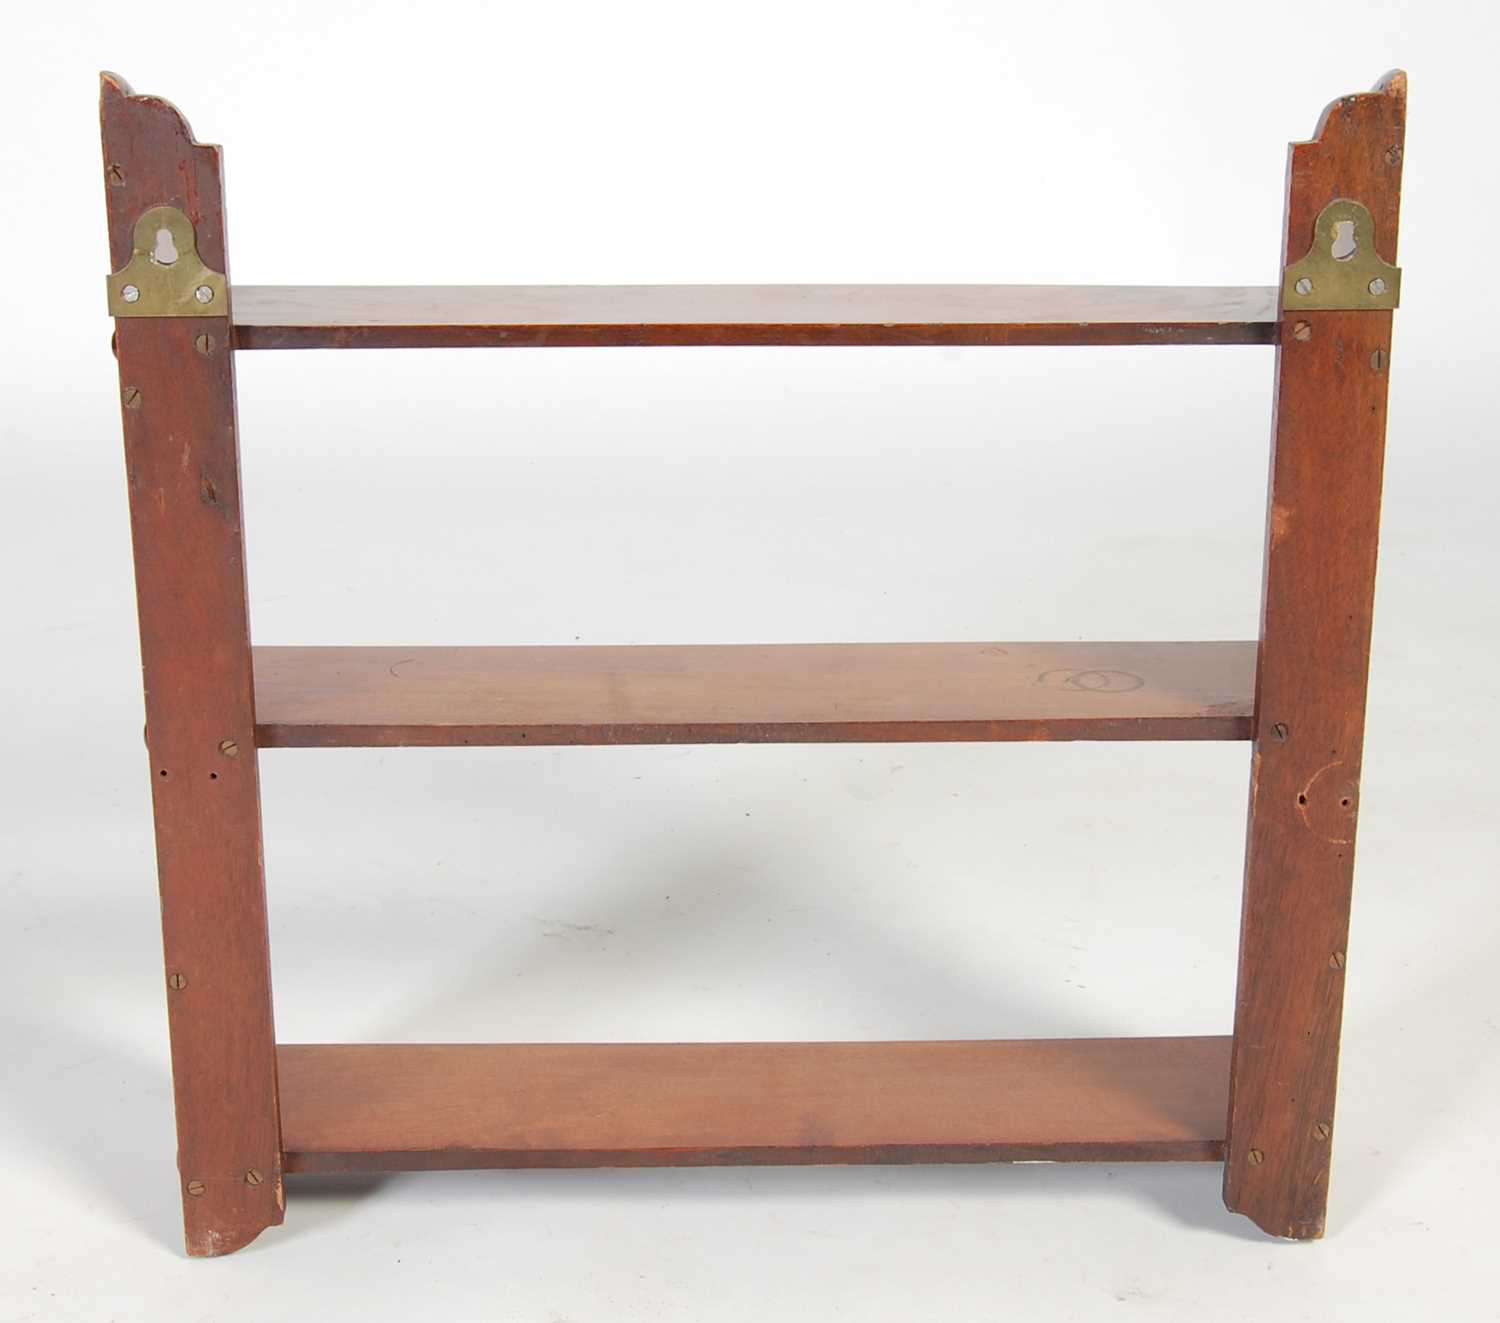 An early 20th century mahogany three-tier hanging shelf, 54.5cm wide x 55cm high - Image 4 of 4